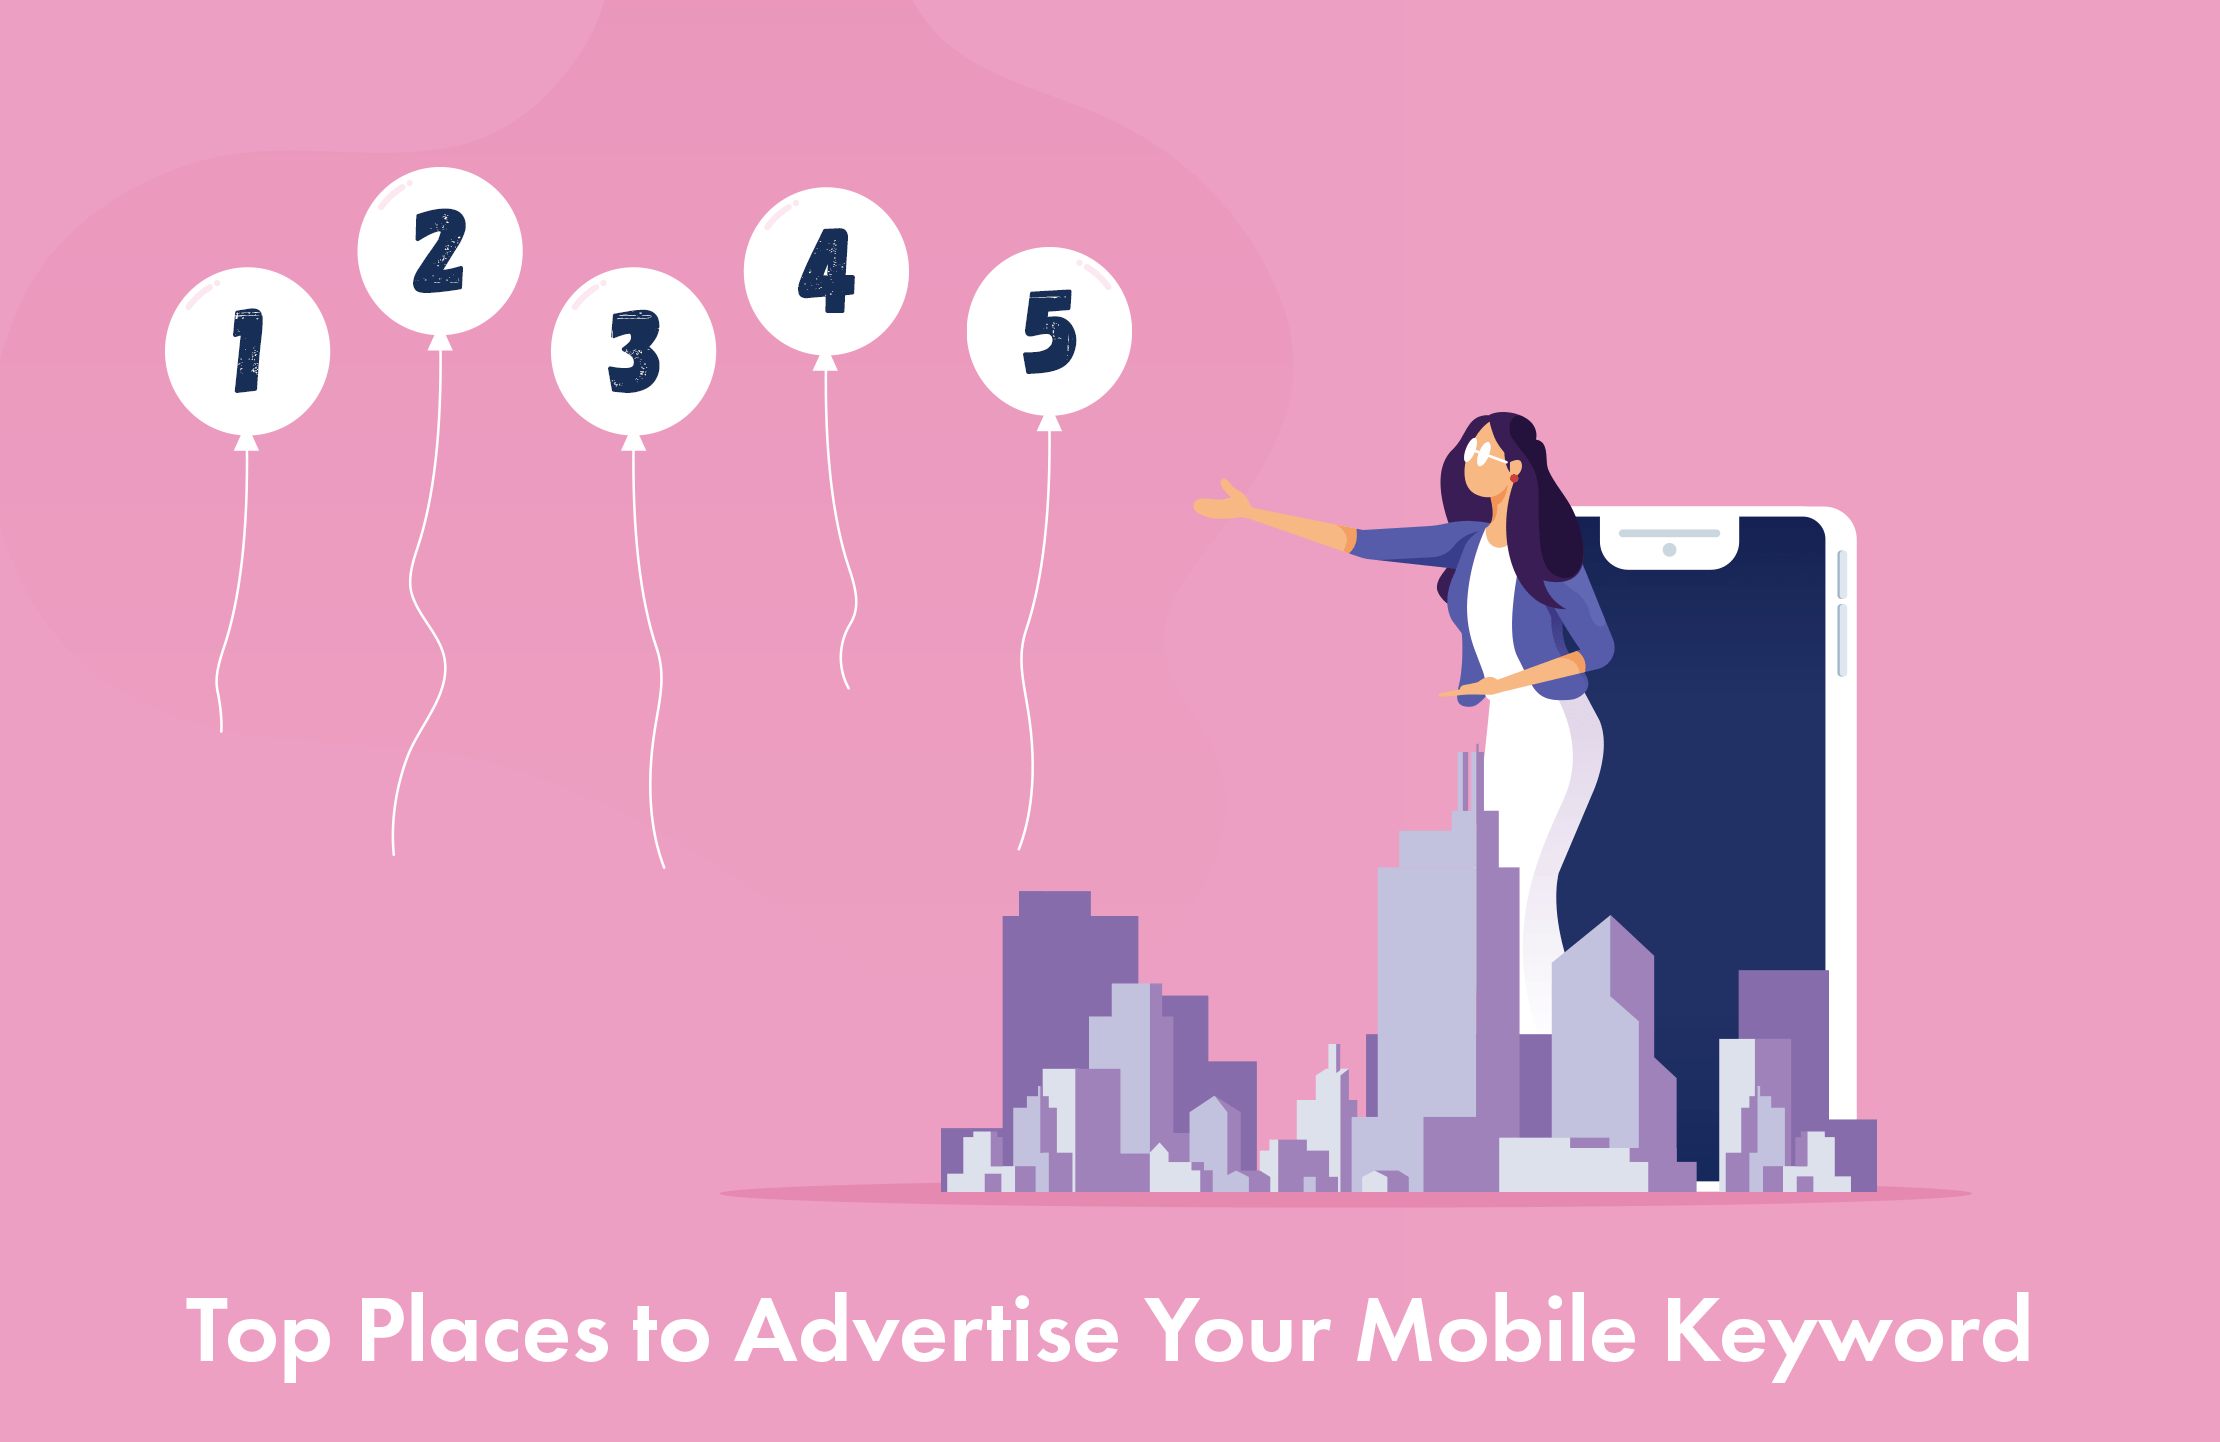 Top Places to Advertise Your Mobile Keyword